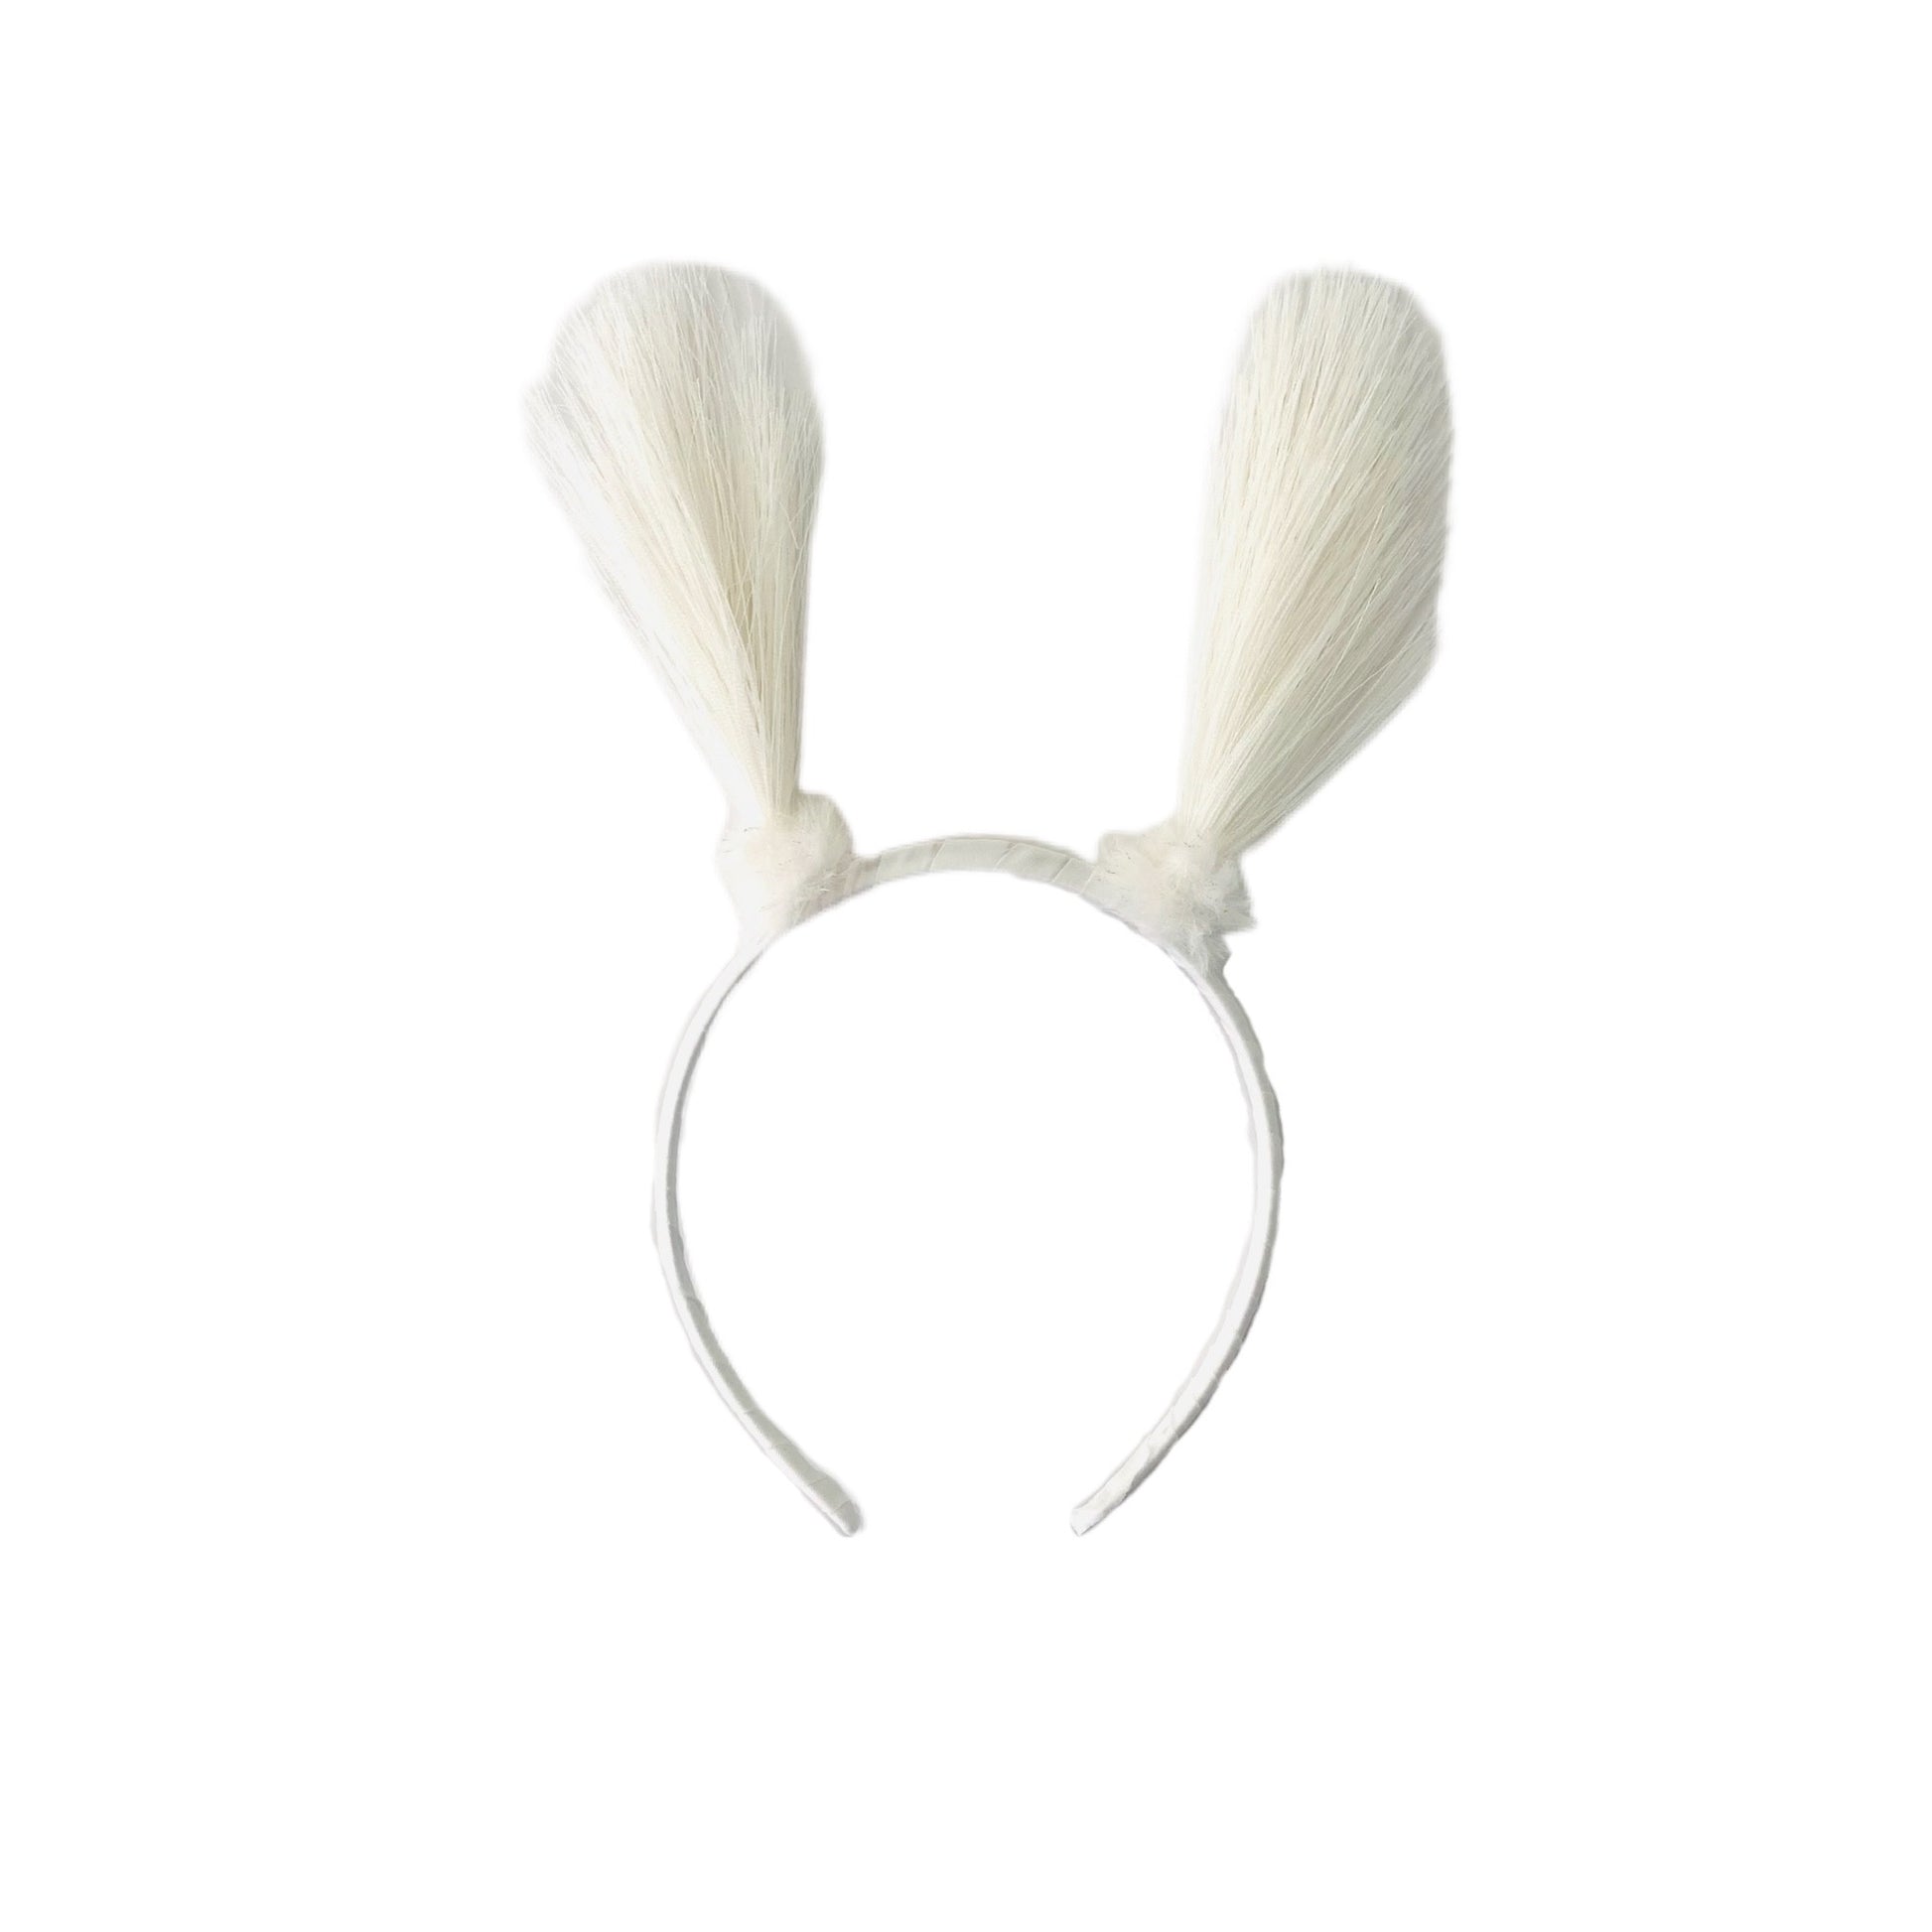 White moth costume antennae headband for kids and adults.